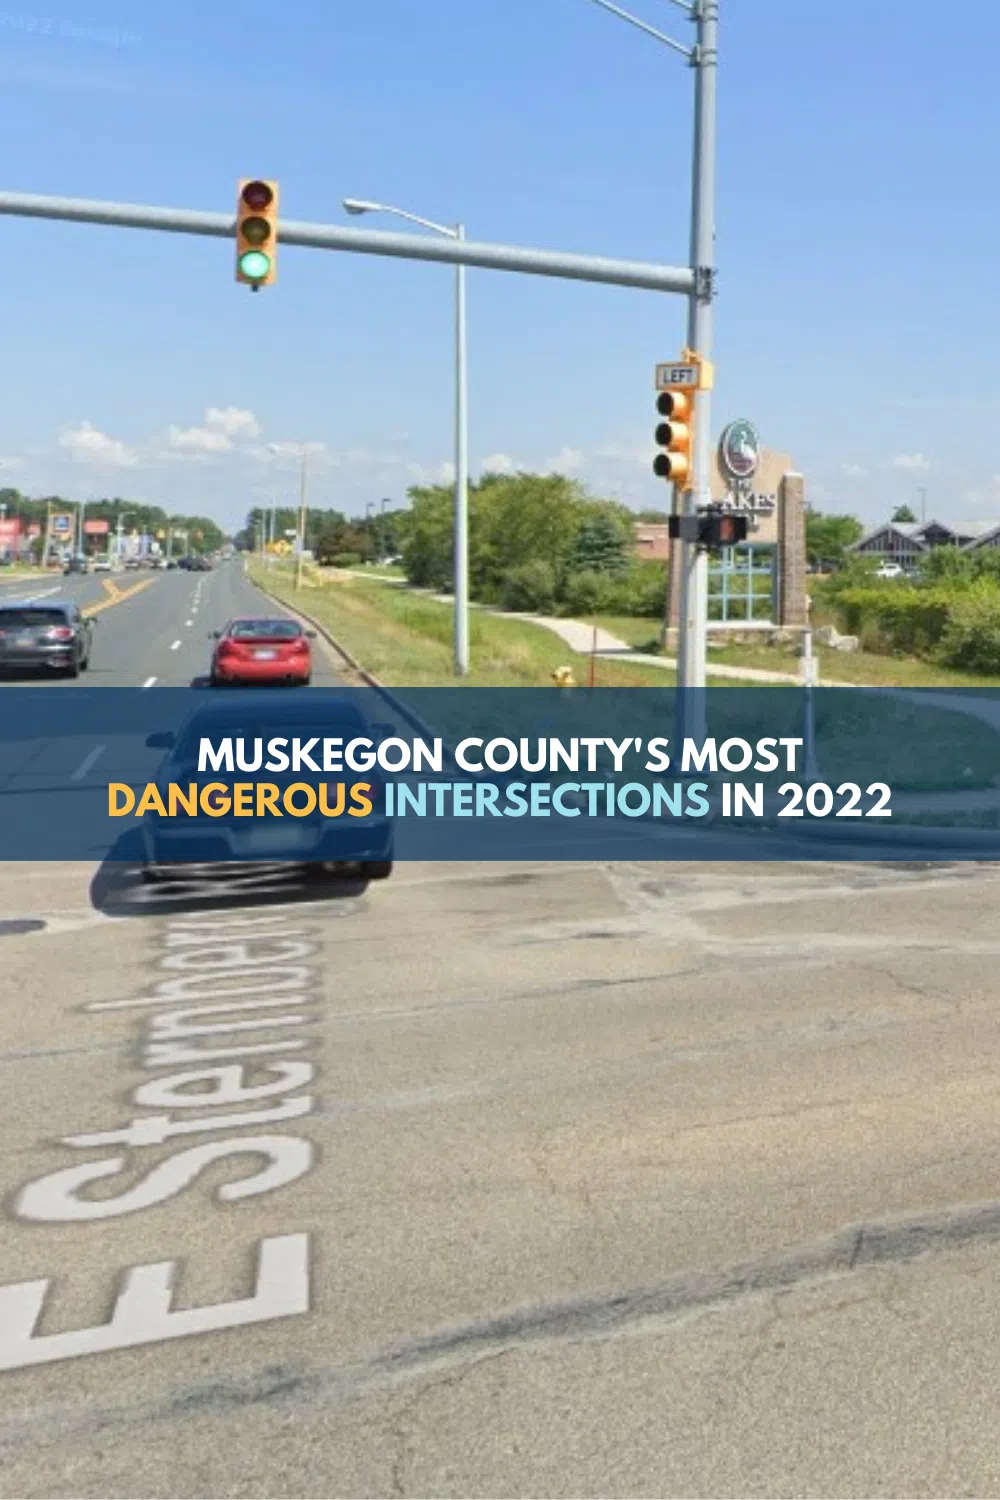 Muskegon County’s Most Dangerous Intersections in 2022